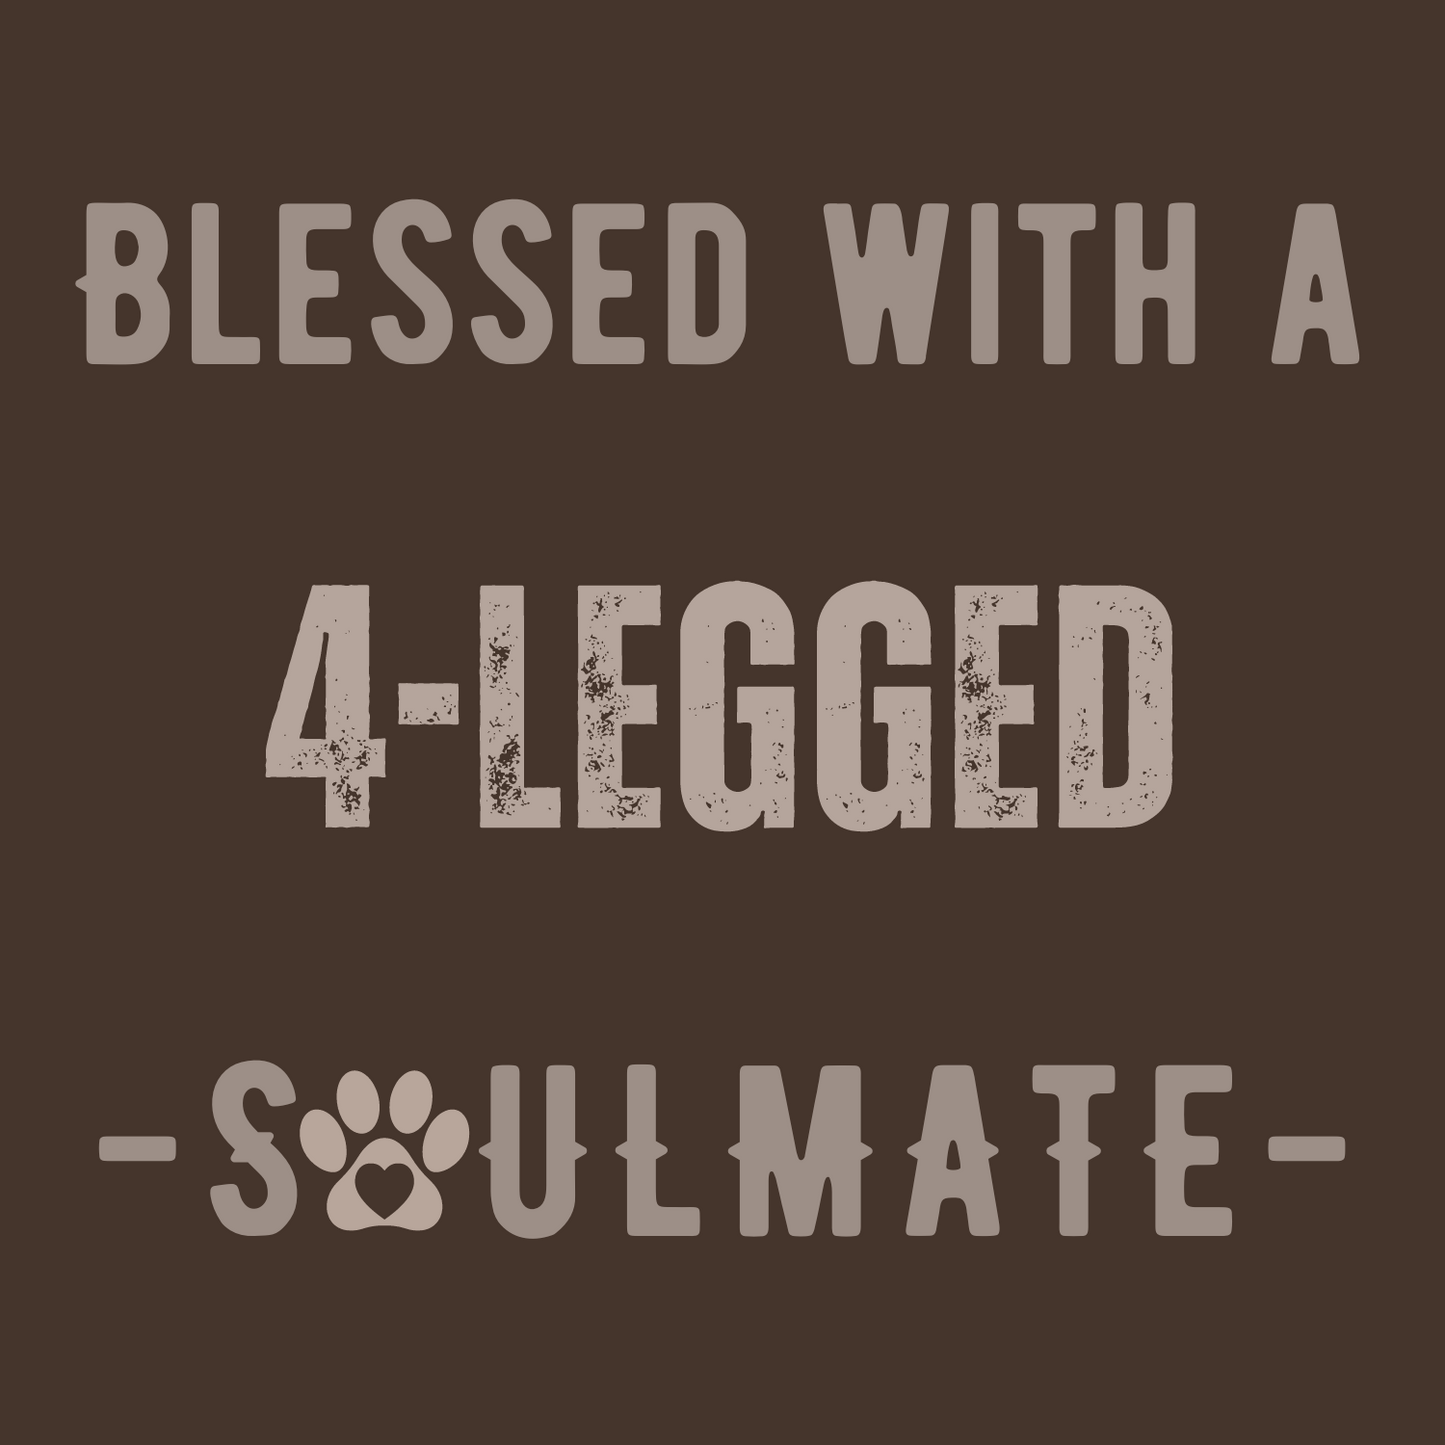 Blessed with a 4-legged Soulmate Bella Canvas 3001 Unisex Tee